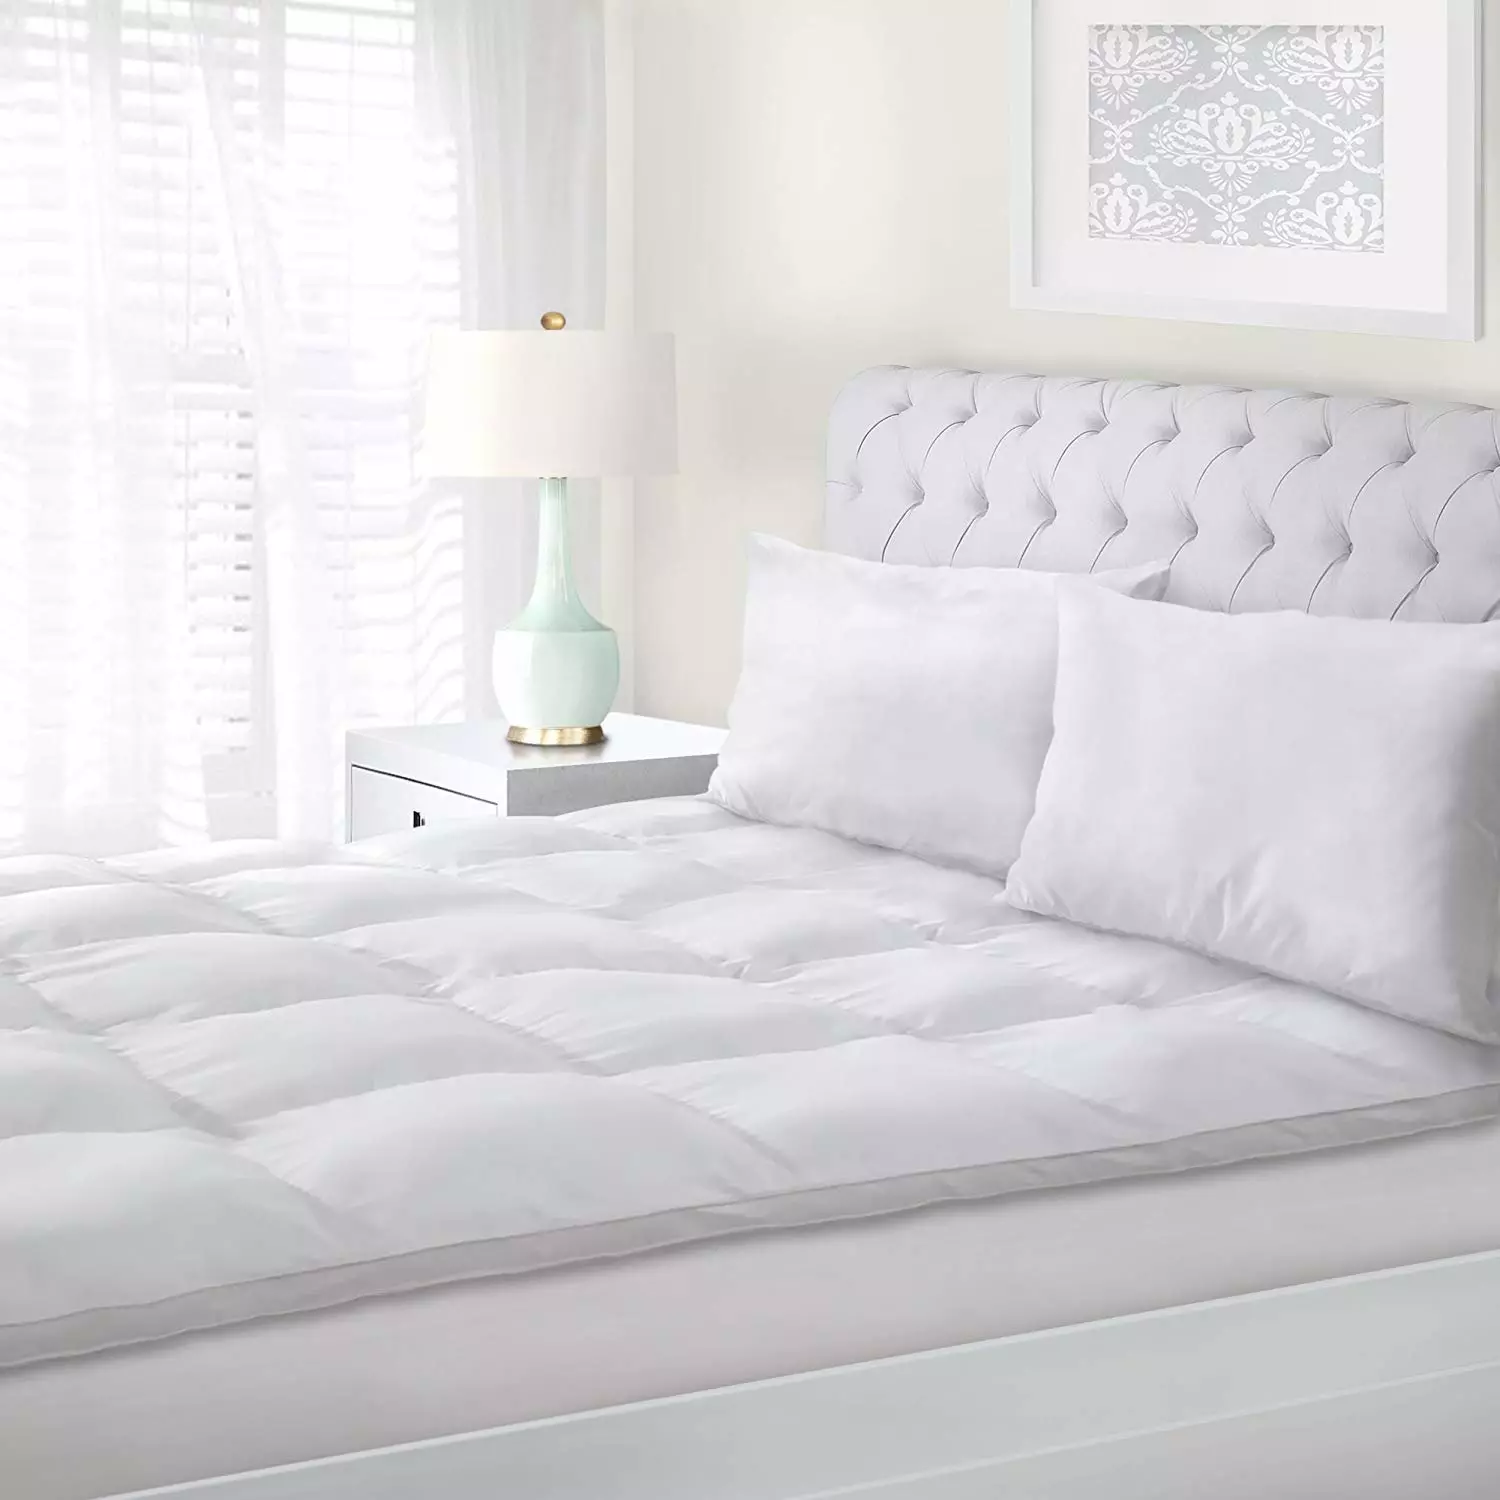 Thick mattress covers: 160x200, 180x200 and 140x200 on the bed, choose a soft high elastic mattress covers 21571_17